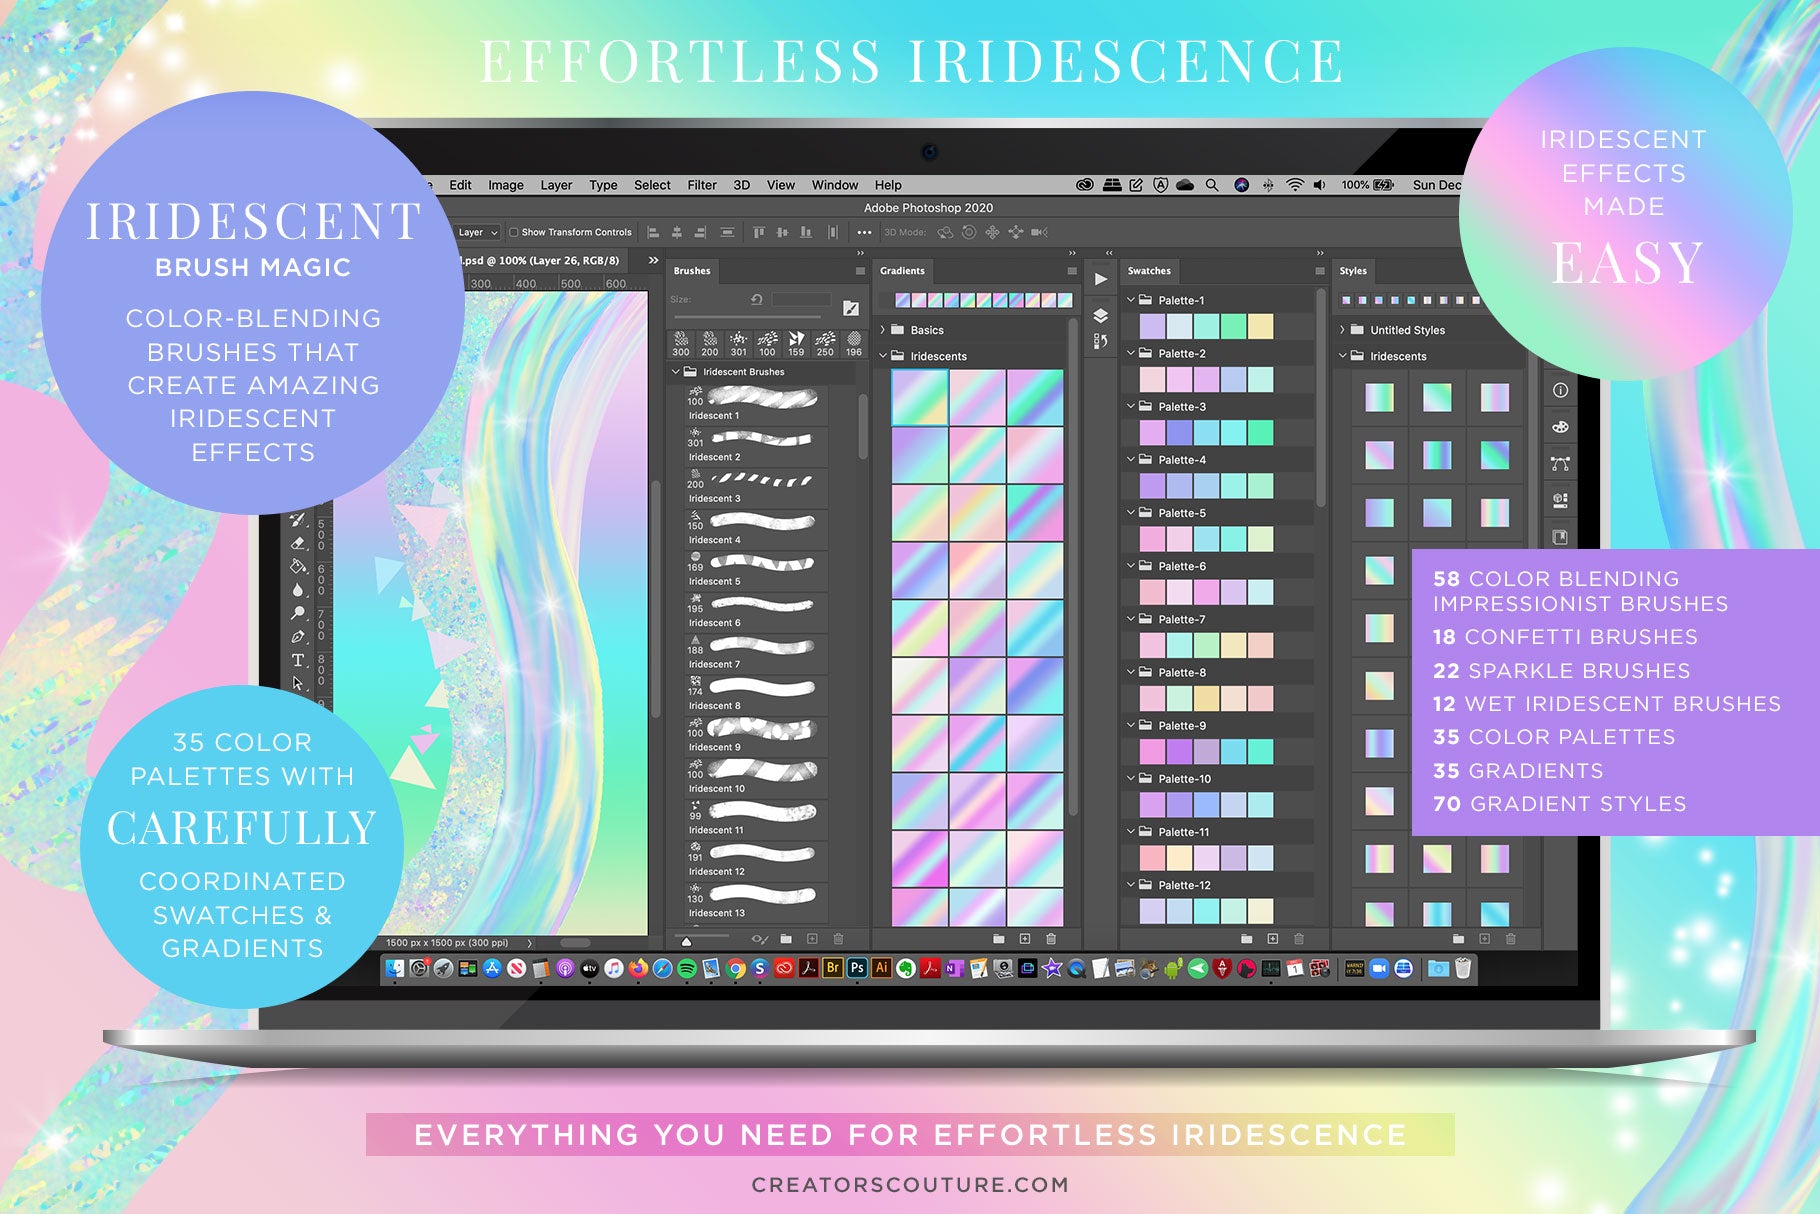 photoshop interface showing iridescent and holographic resources for photoshop - iridescent brushes, color palettes, gradients, layer styles